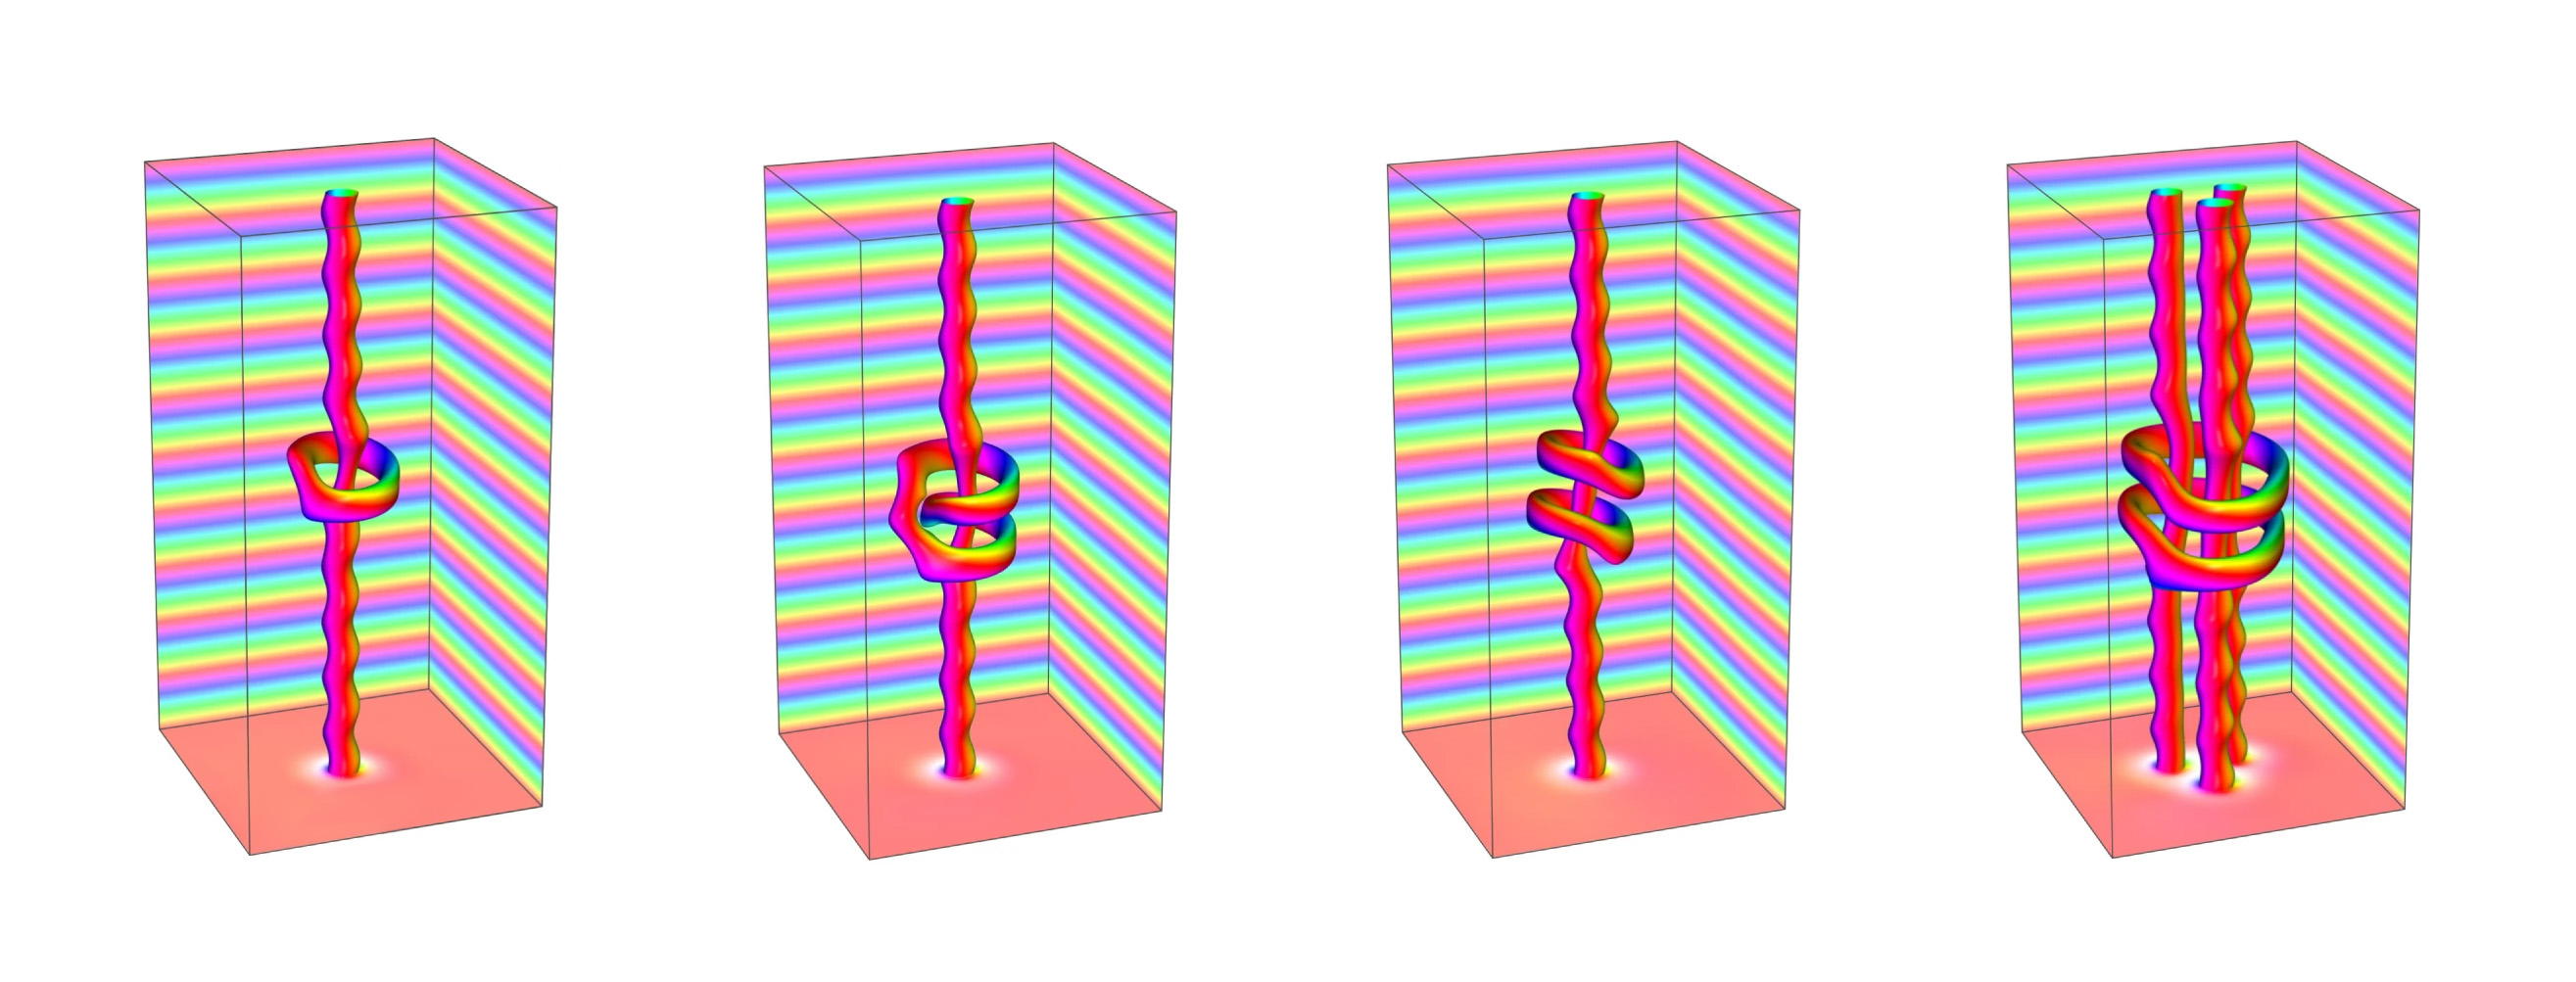 Computer simulations of hopfion rings of different topological charges